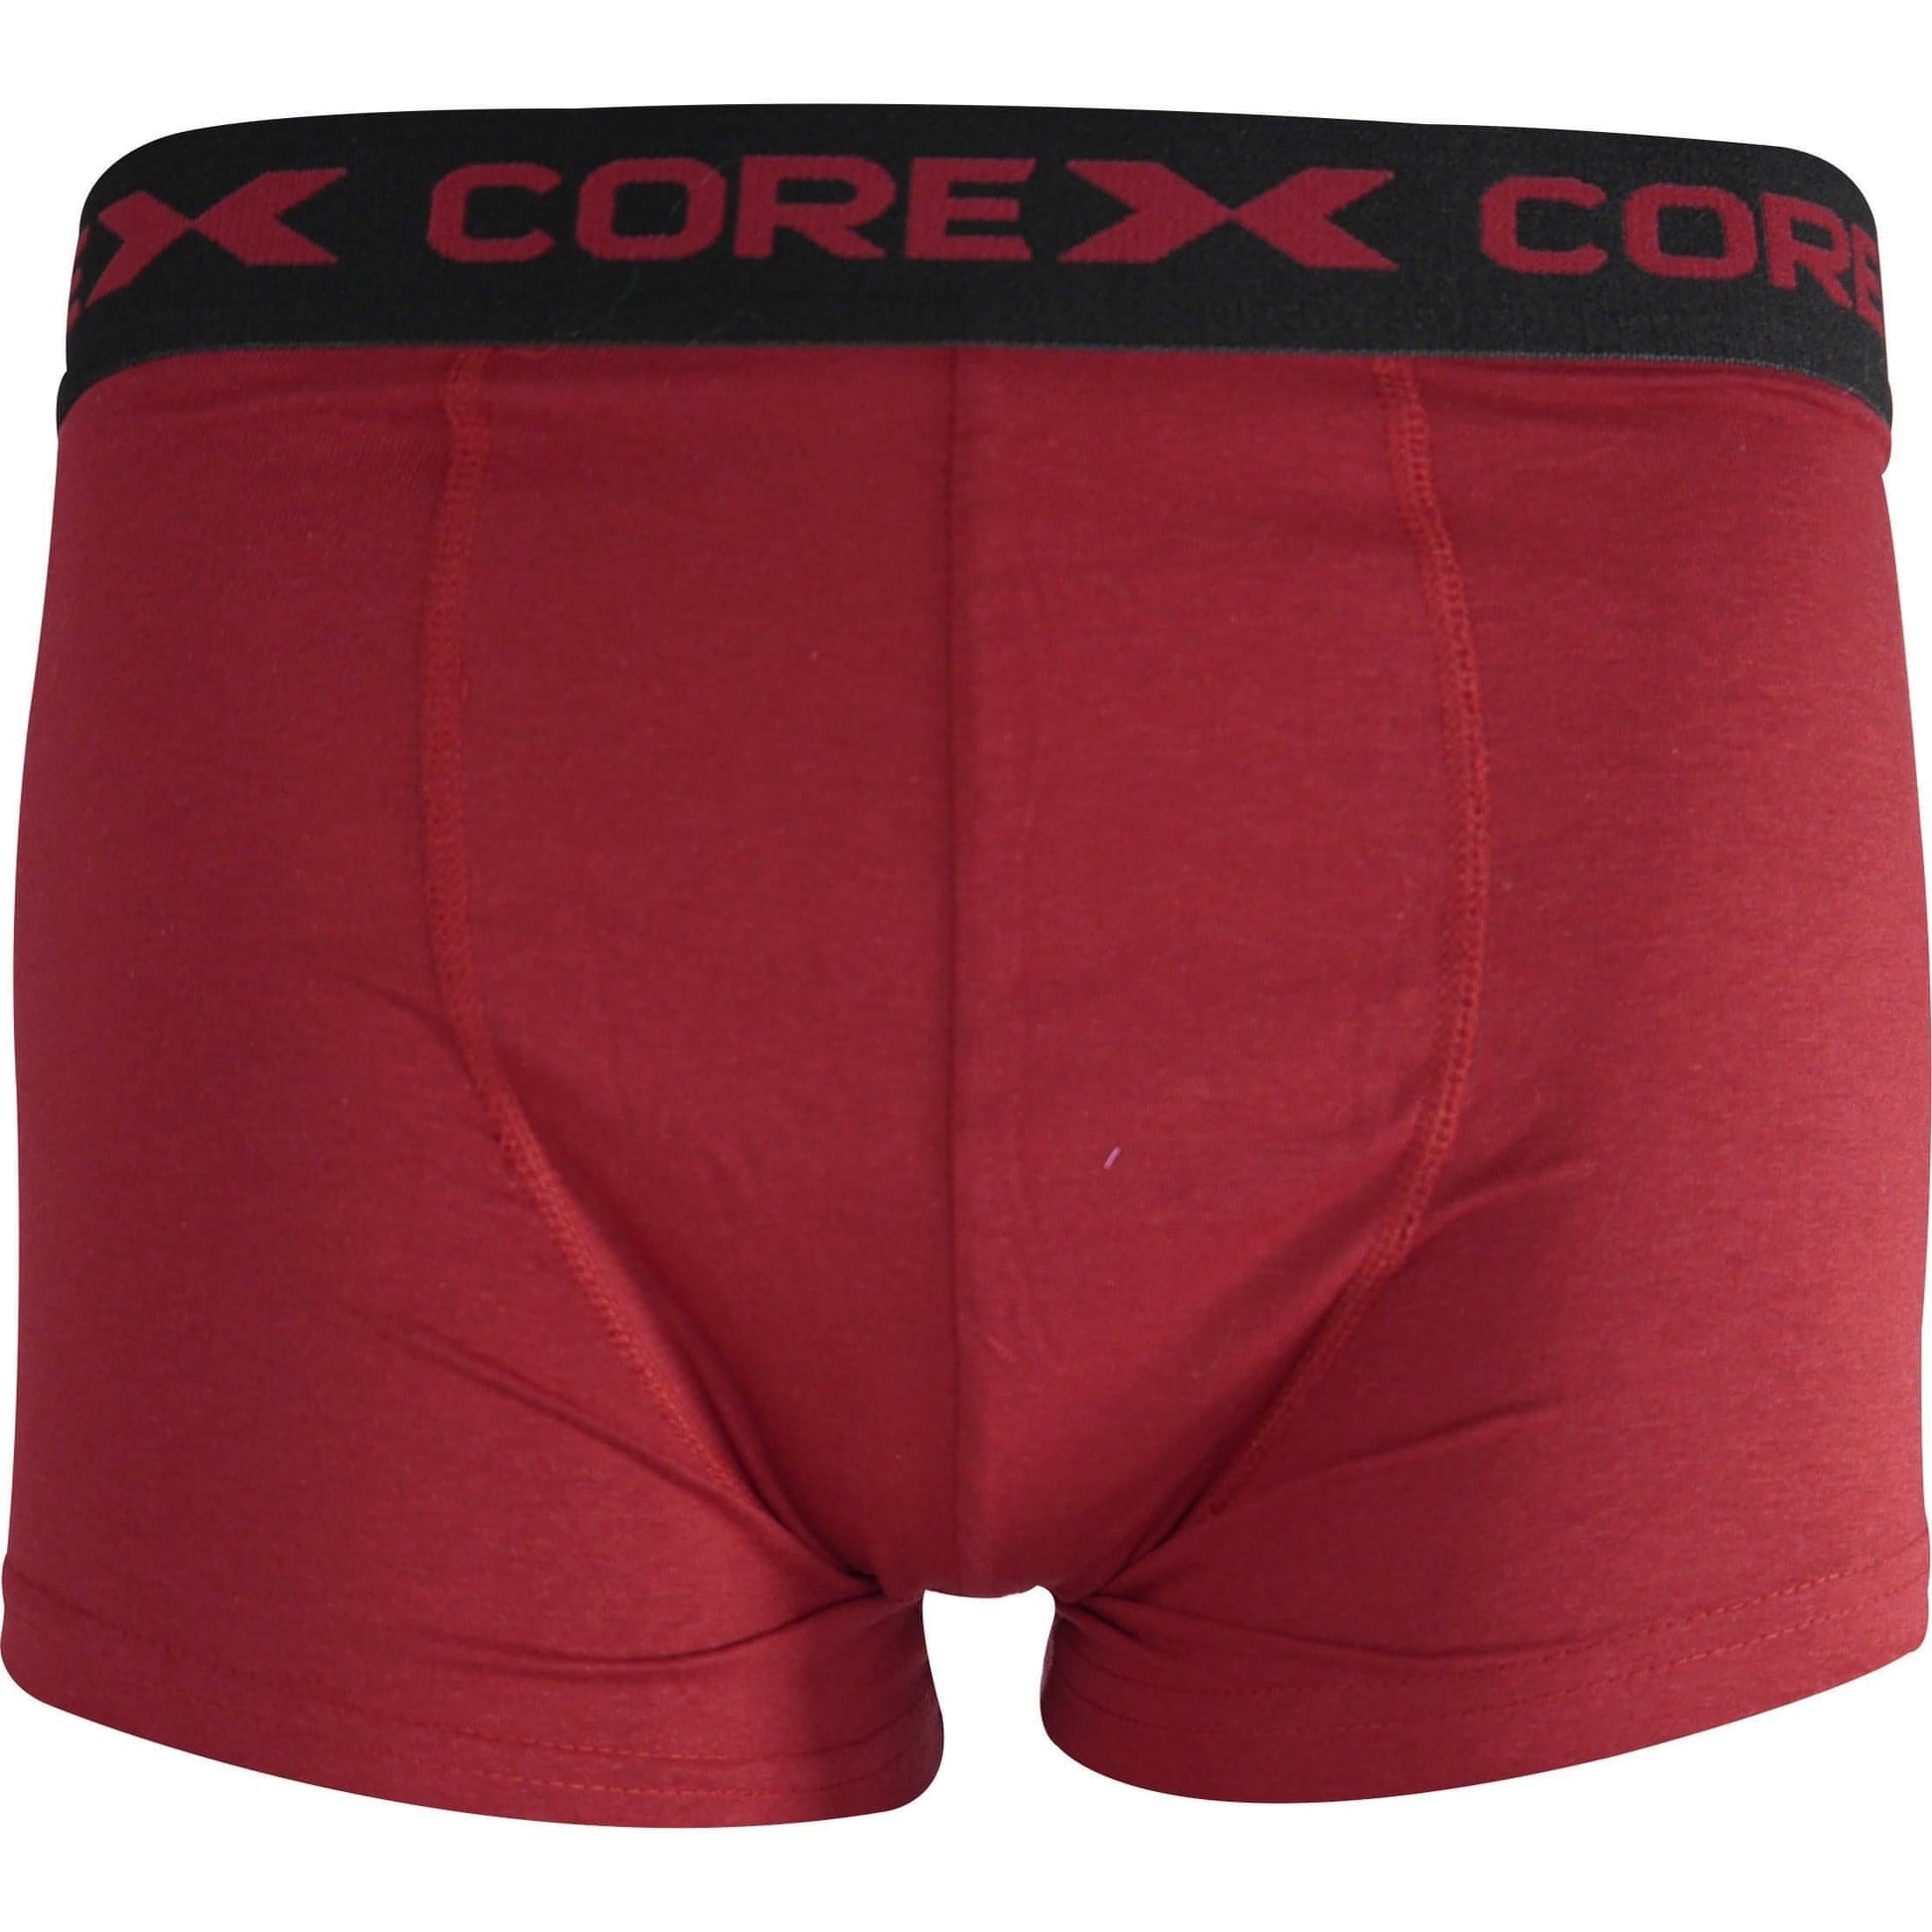 Corex Fitness Classic Pack Boxers 1P204911Wm Blackred Red Front - Front View